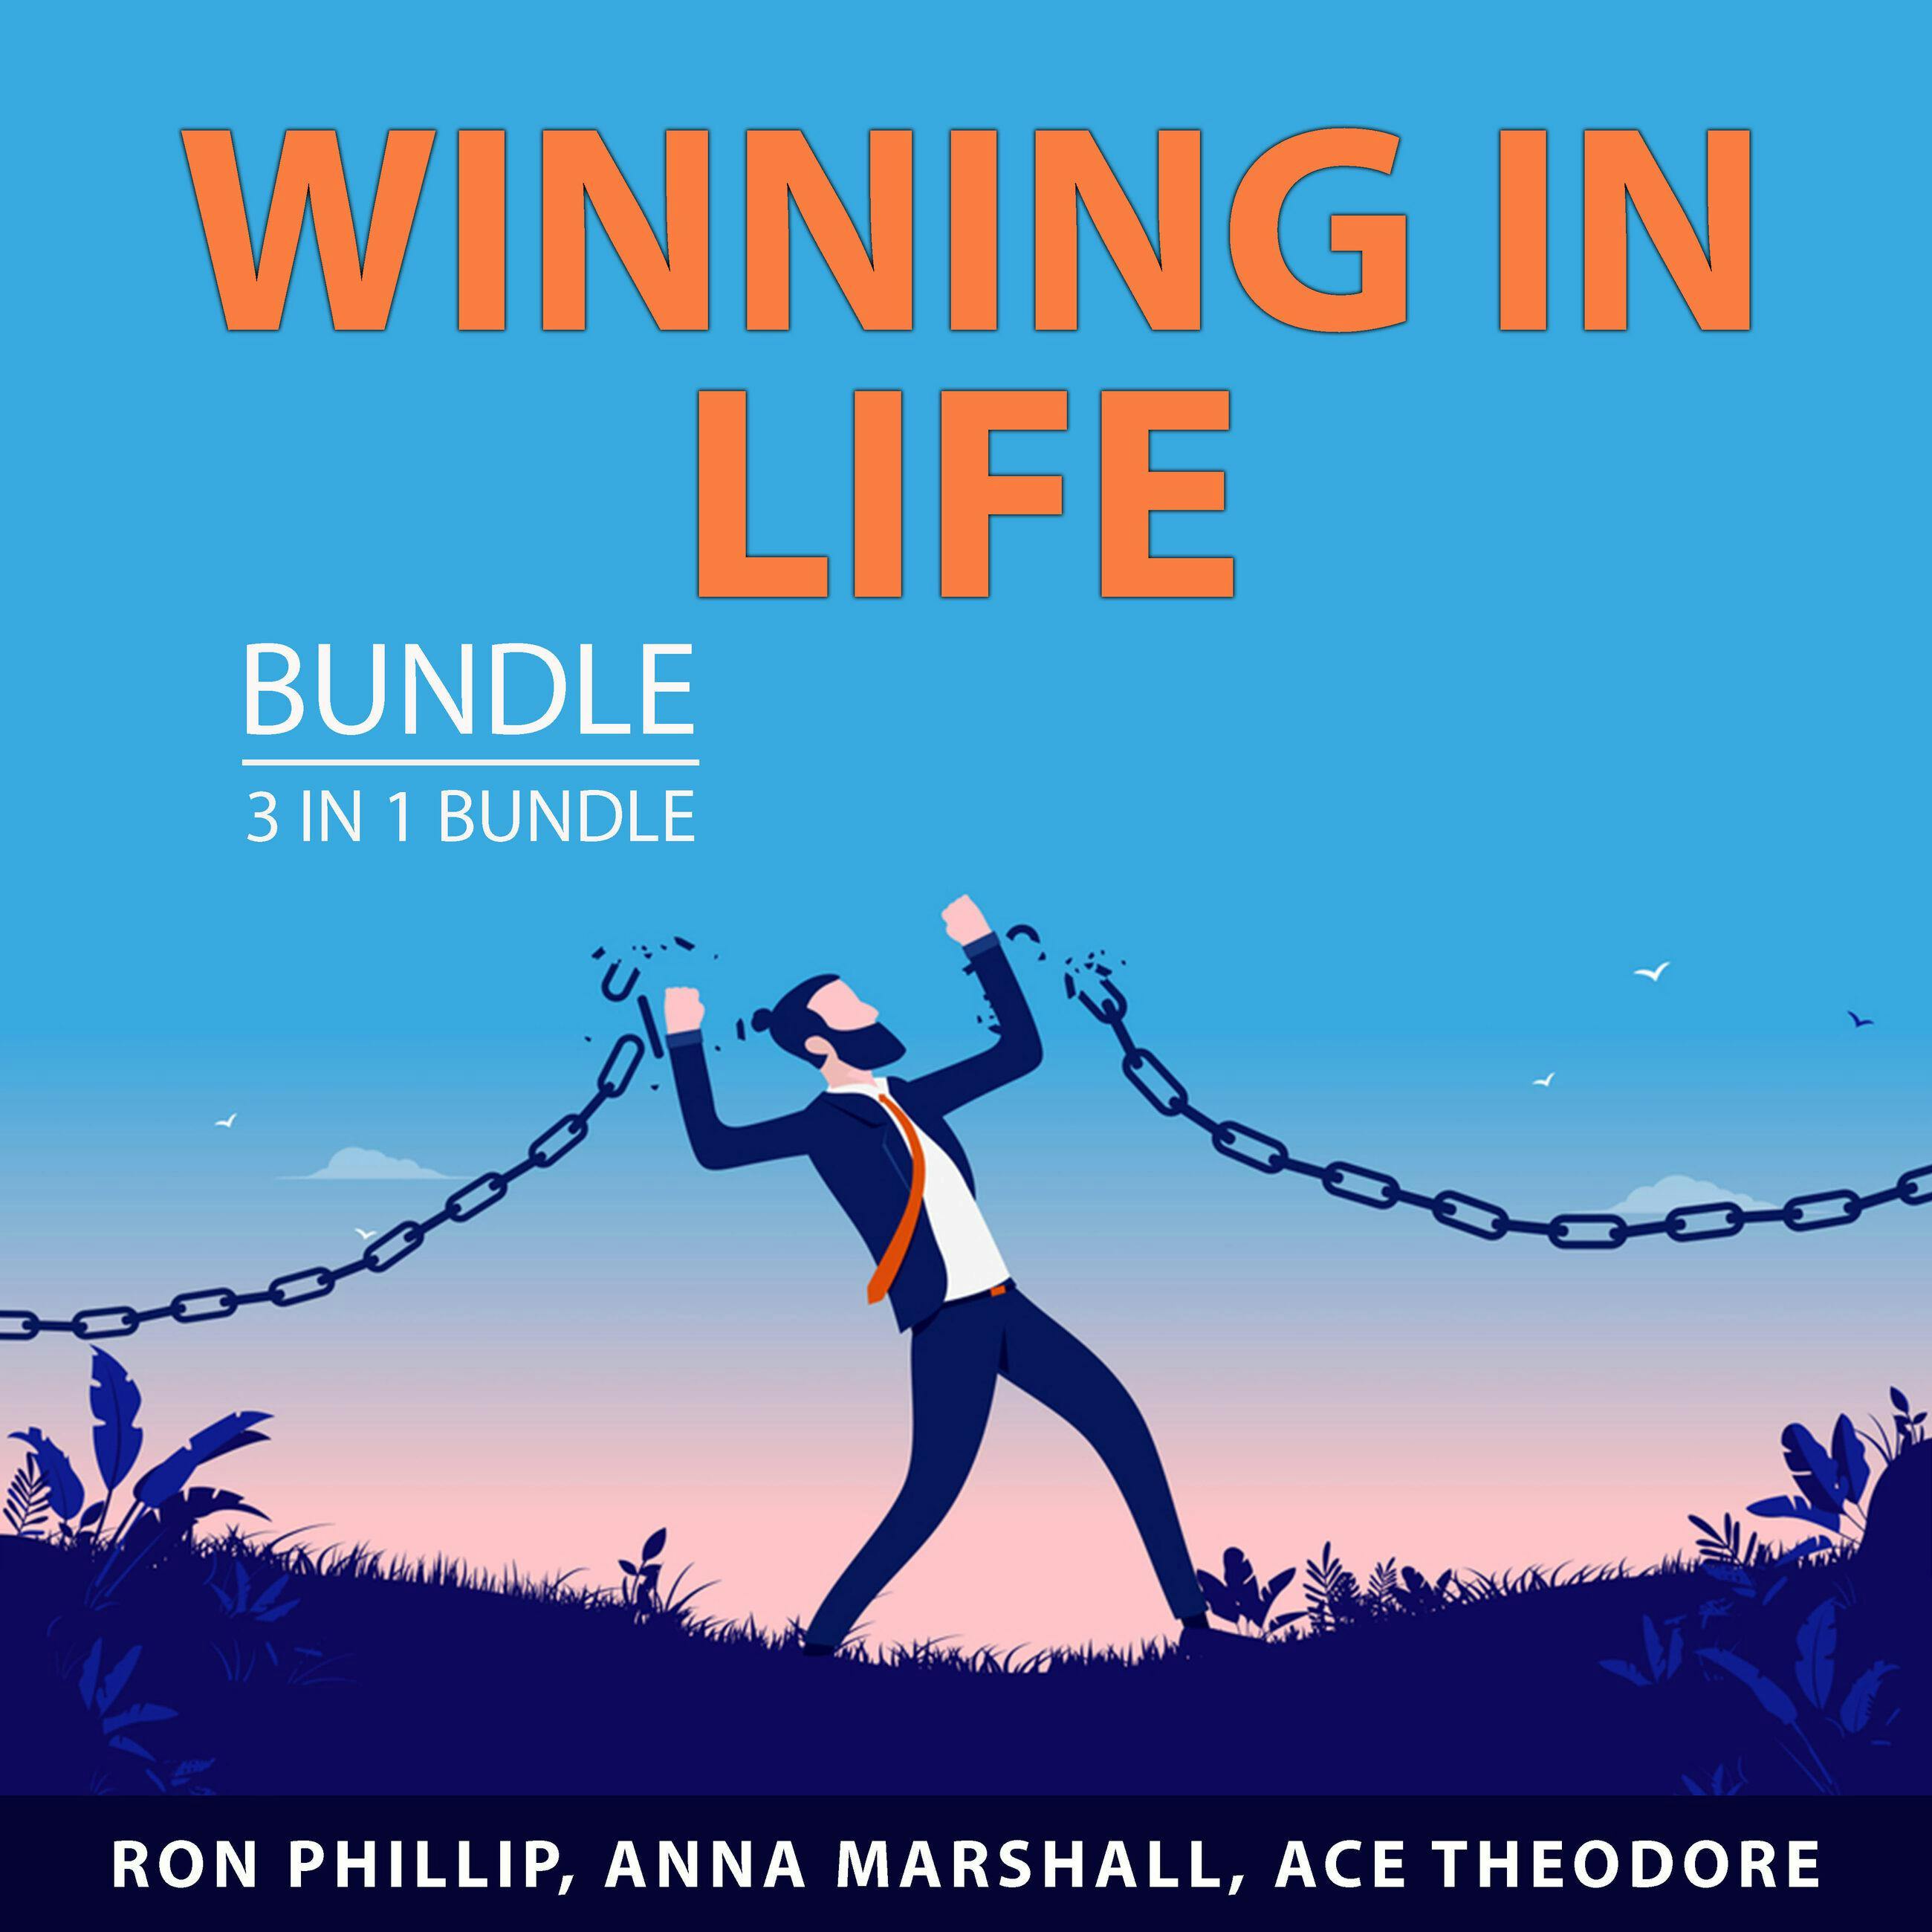 Winning in Life Bundle, 3 in 1 Bundle: How To Get What You Want, Power of Abundance Mindset, and Achieve Your True Calling - undefined